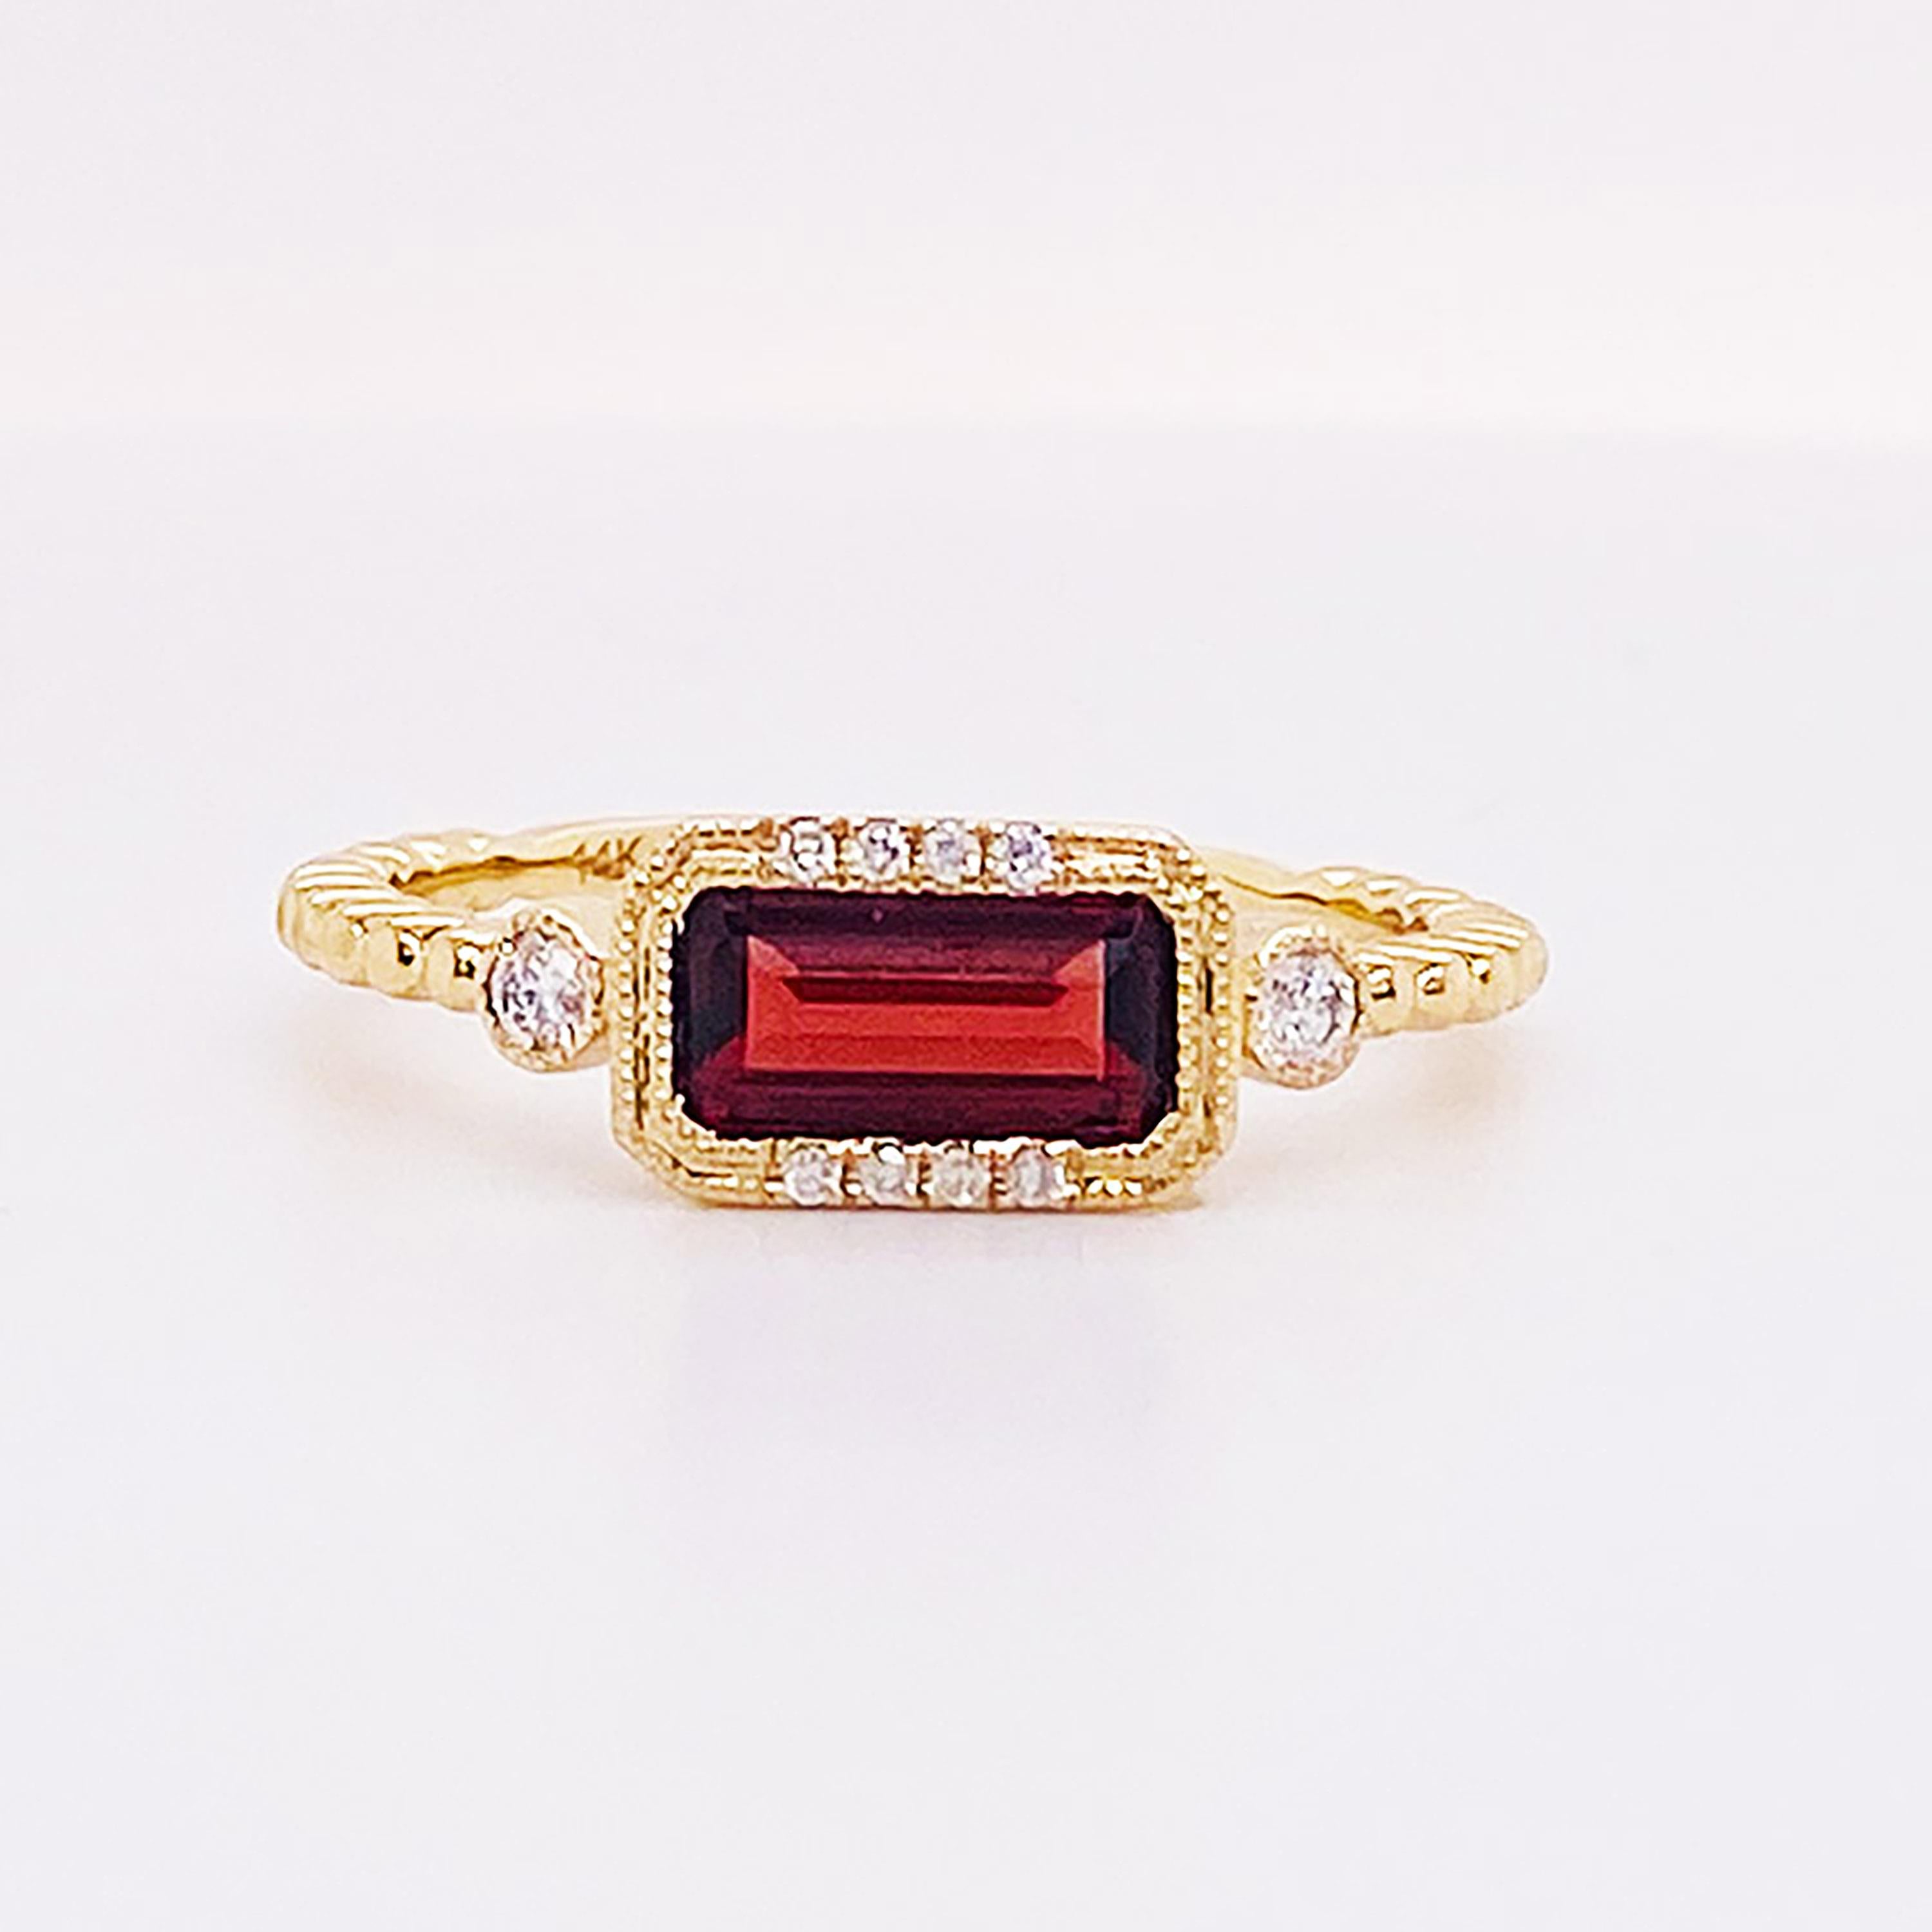 For Sale:  Garnet Diamond Ring January East to West 14K Gold Yellow Gold 4